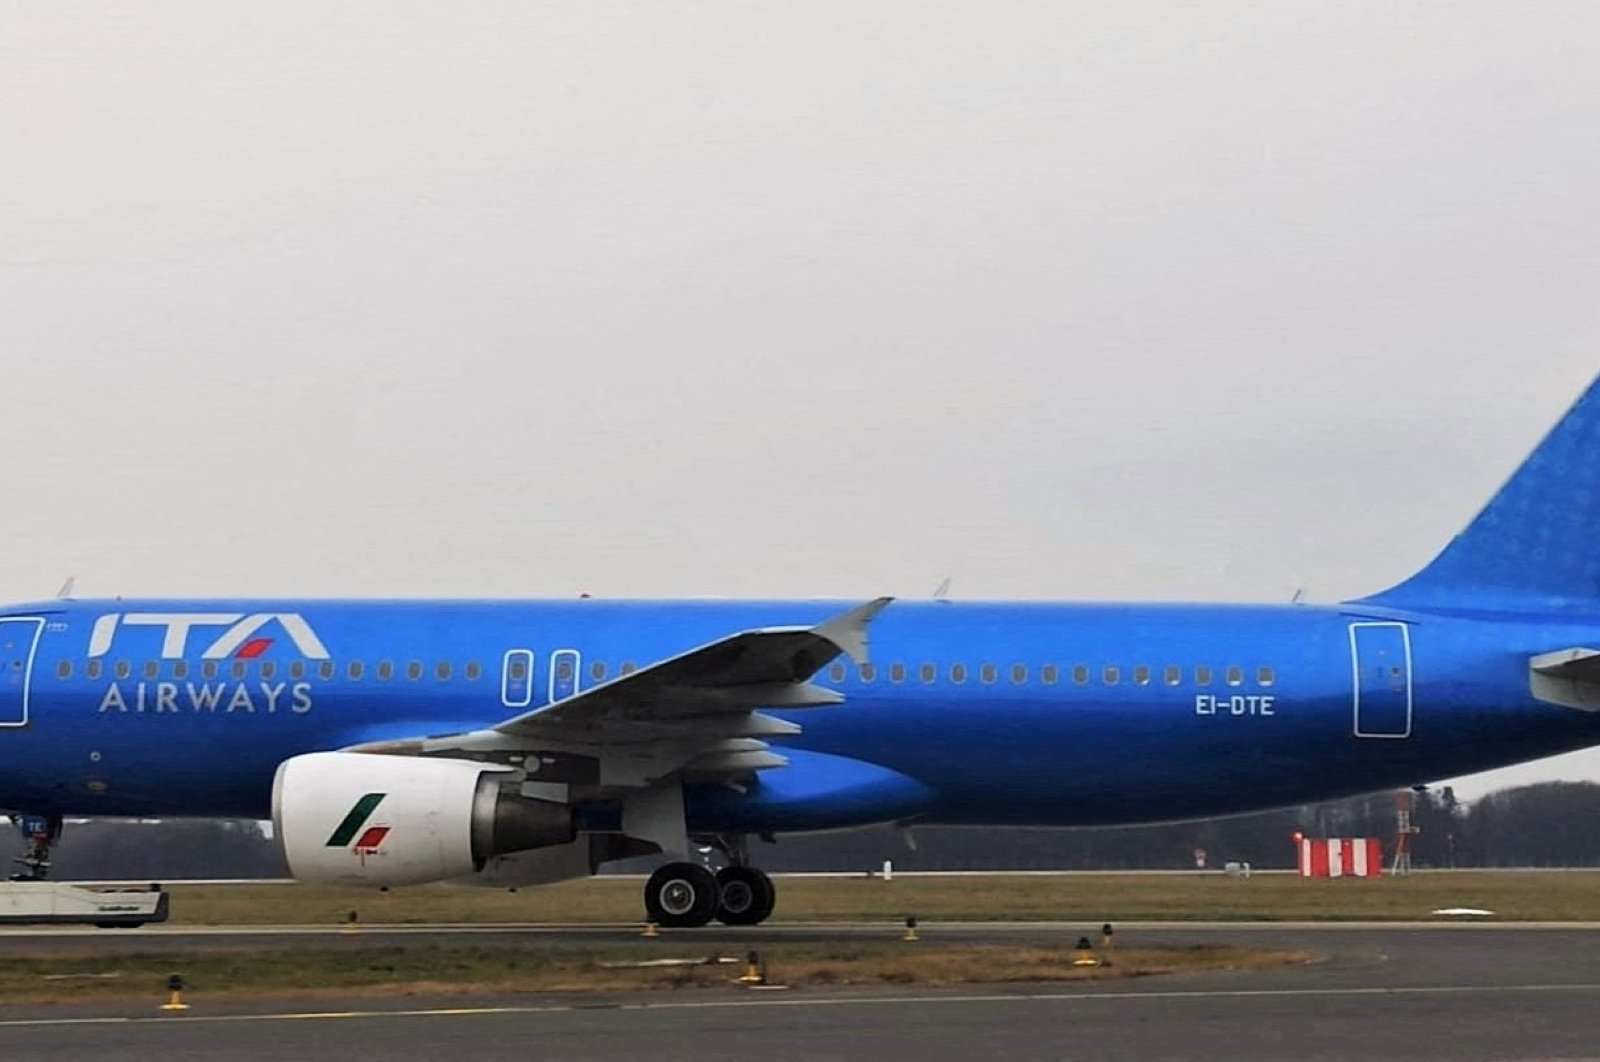 A new state-owned Italian carrier Italia Trasporto Aereo (ITA Airways) plane with the new blue livery dedicated to the Italian football player Paolo Rossi, is seen at Fiumicino airport, in Rome, Italy, Dec. 24, 2021. (Reuters Photo)